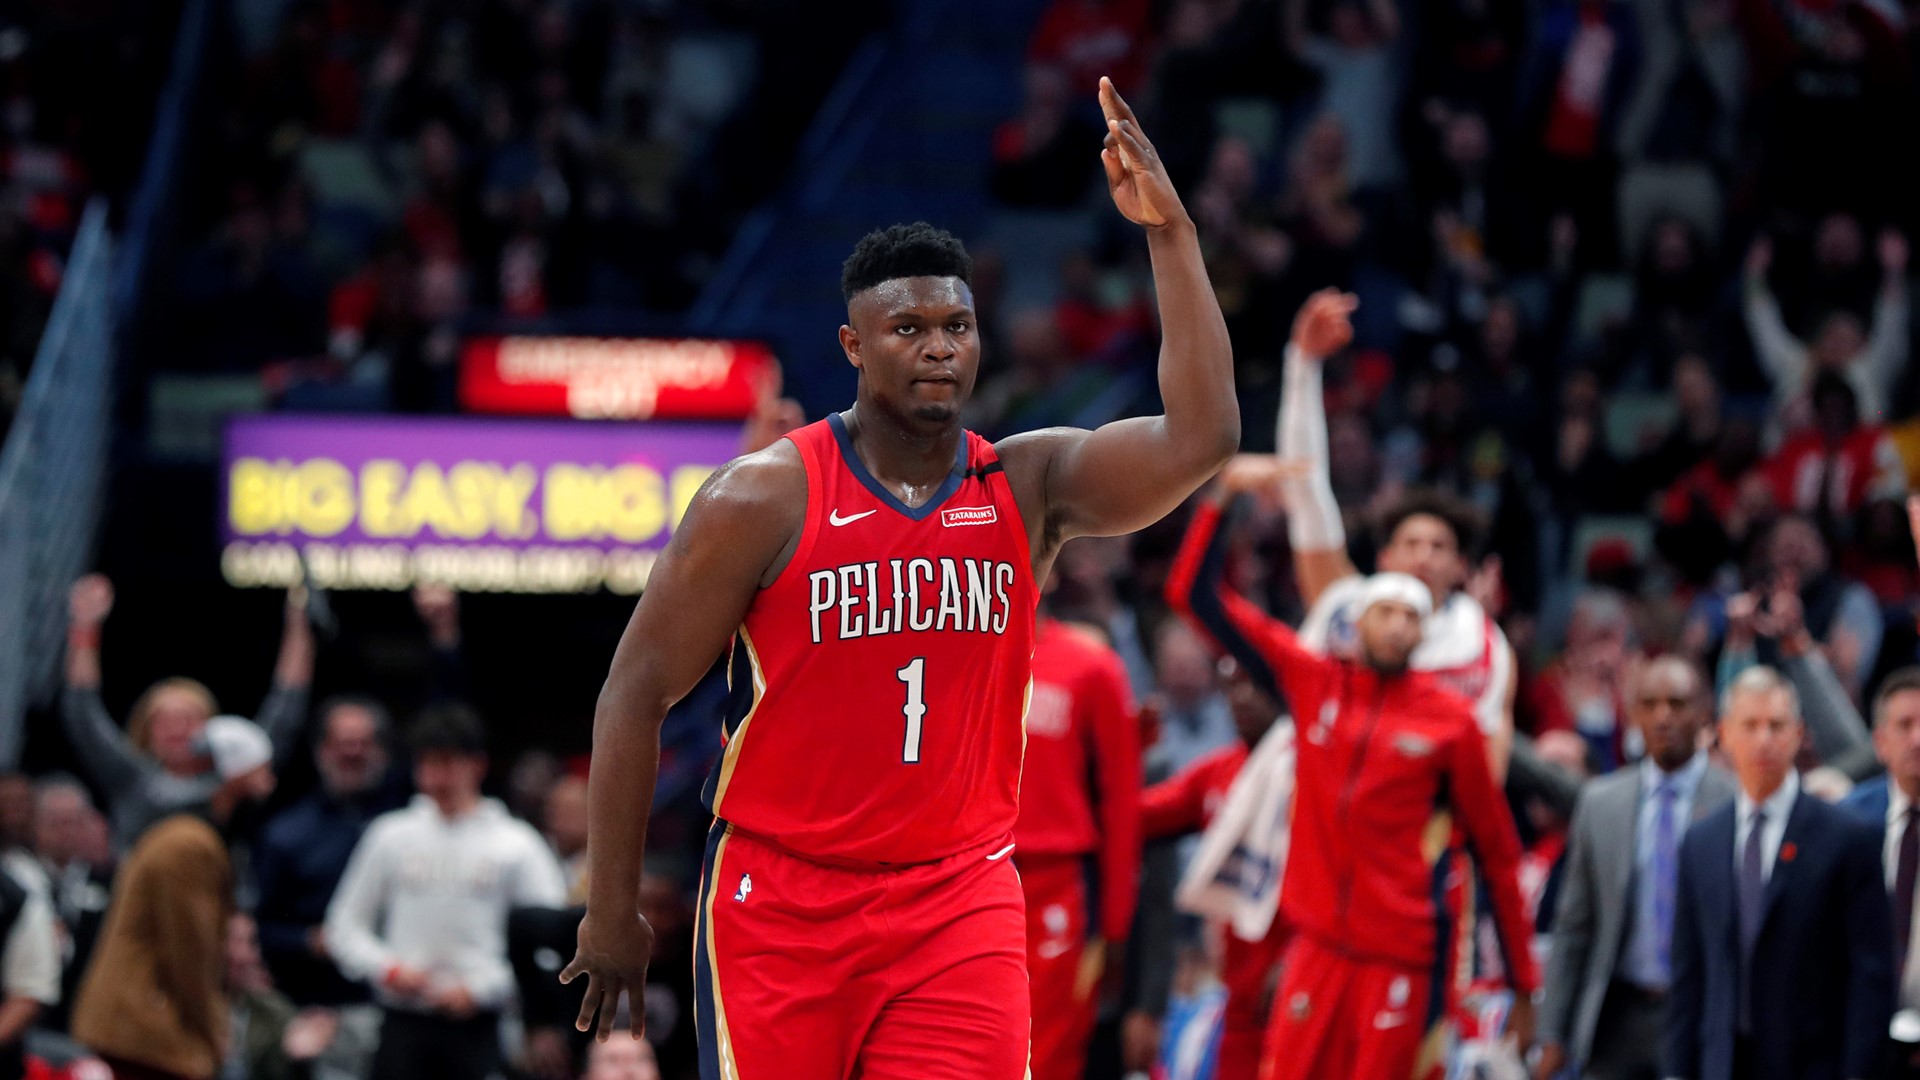 Pelicans release 202122 schedule, play 15 nationally televised games